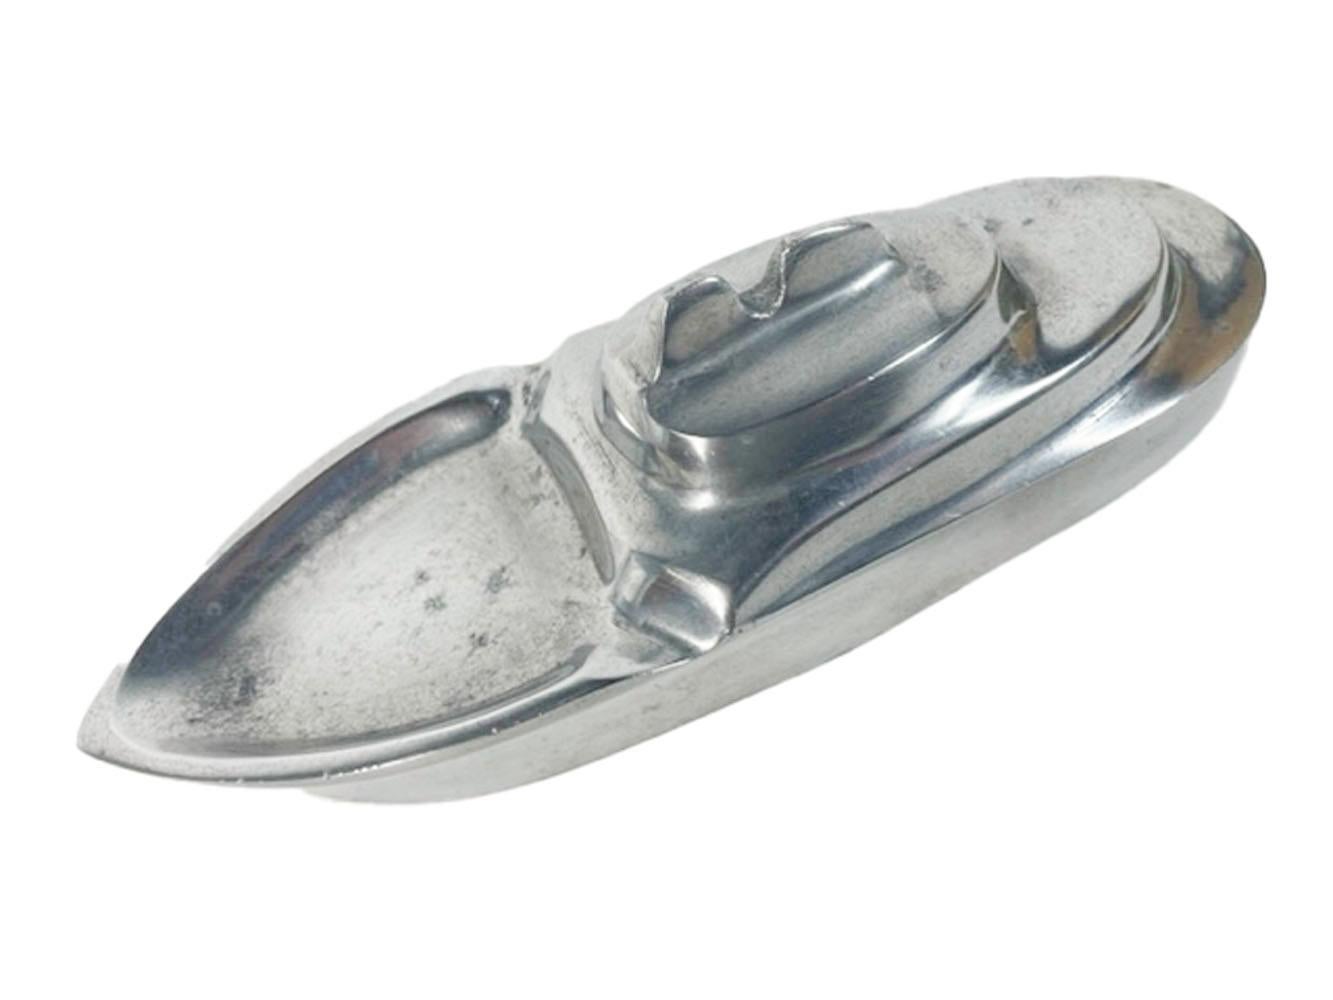 Vintage hand finished cast aluminum ashtray for cigars or cigarettes in the form of a streamlined ocean liner.